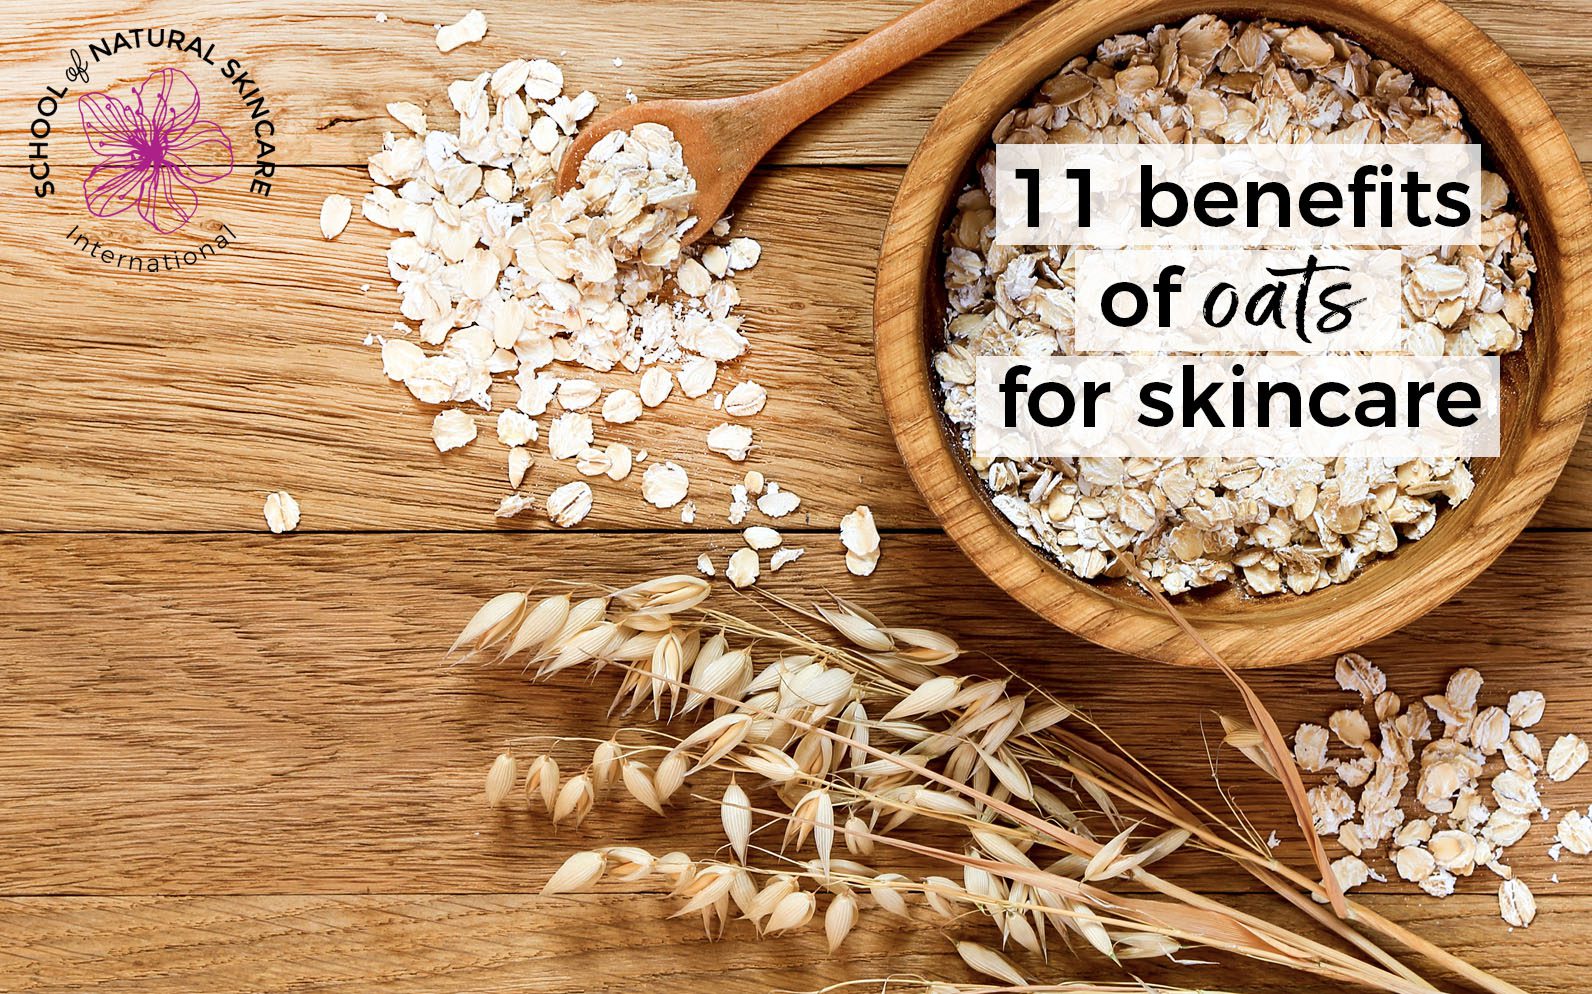 Colloidal Oatmeal For Skin: Benefits & Best Products To Shop